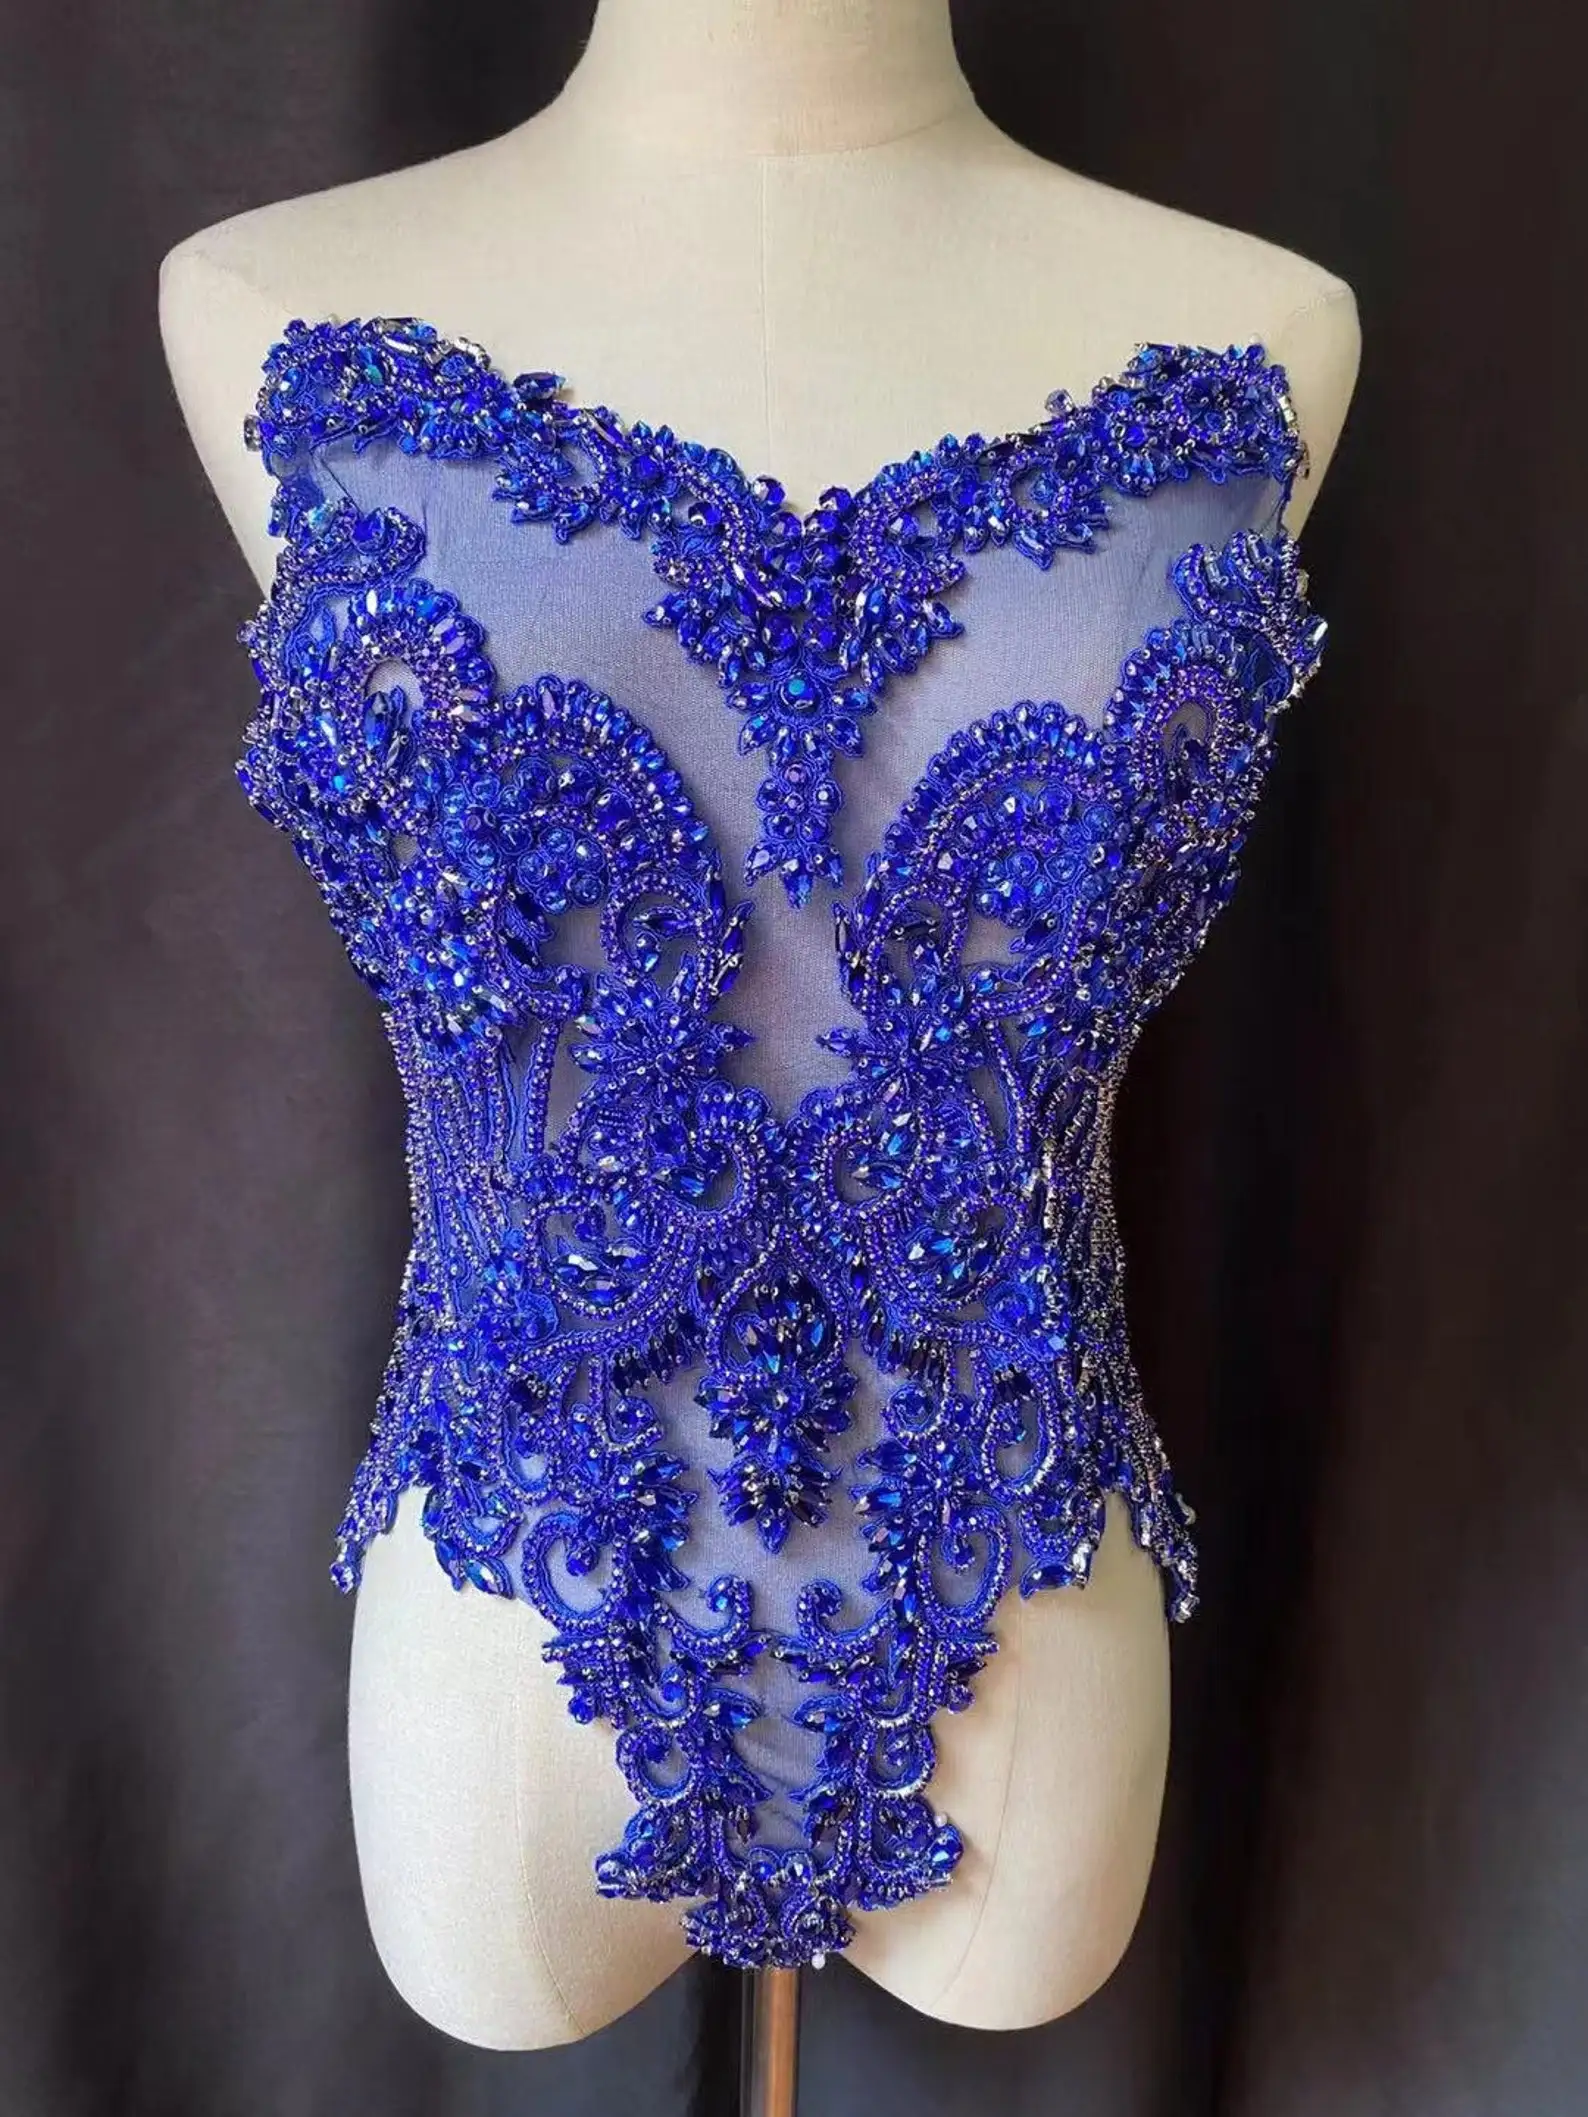 

1 PC Royal Blue Crystal Rhinestone Beaded Bridal Bodice Applique for Wedding Belt Bridal Sash ,Haute Couture Aceessories WK0417